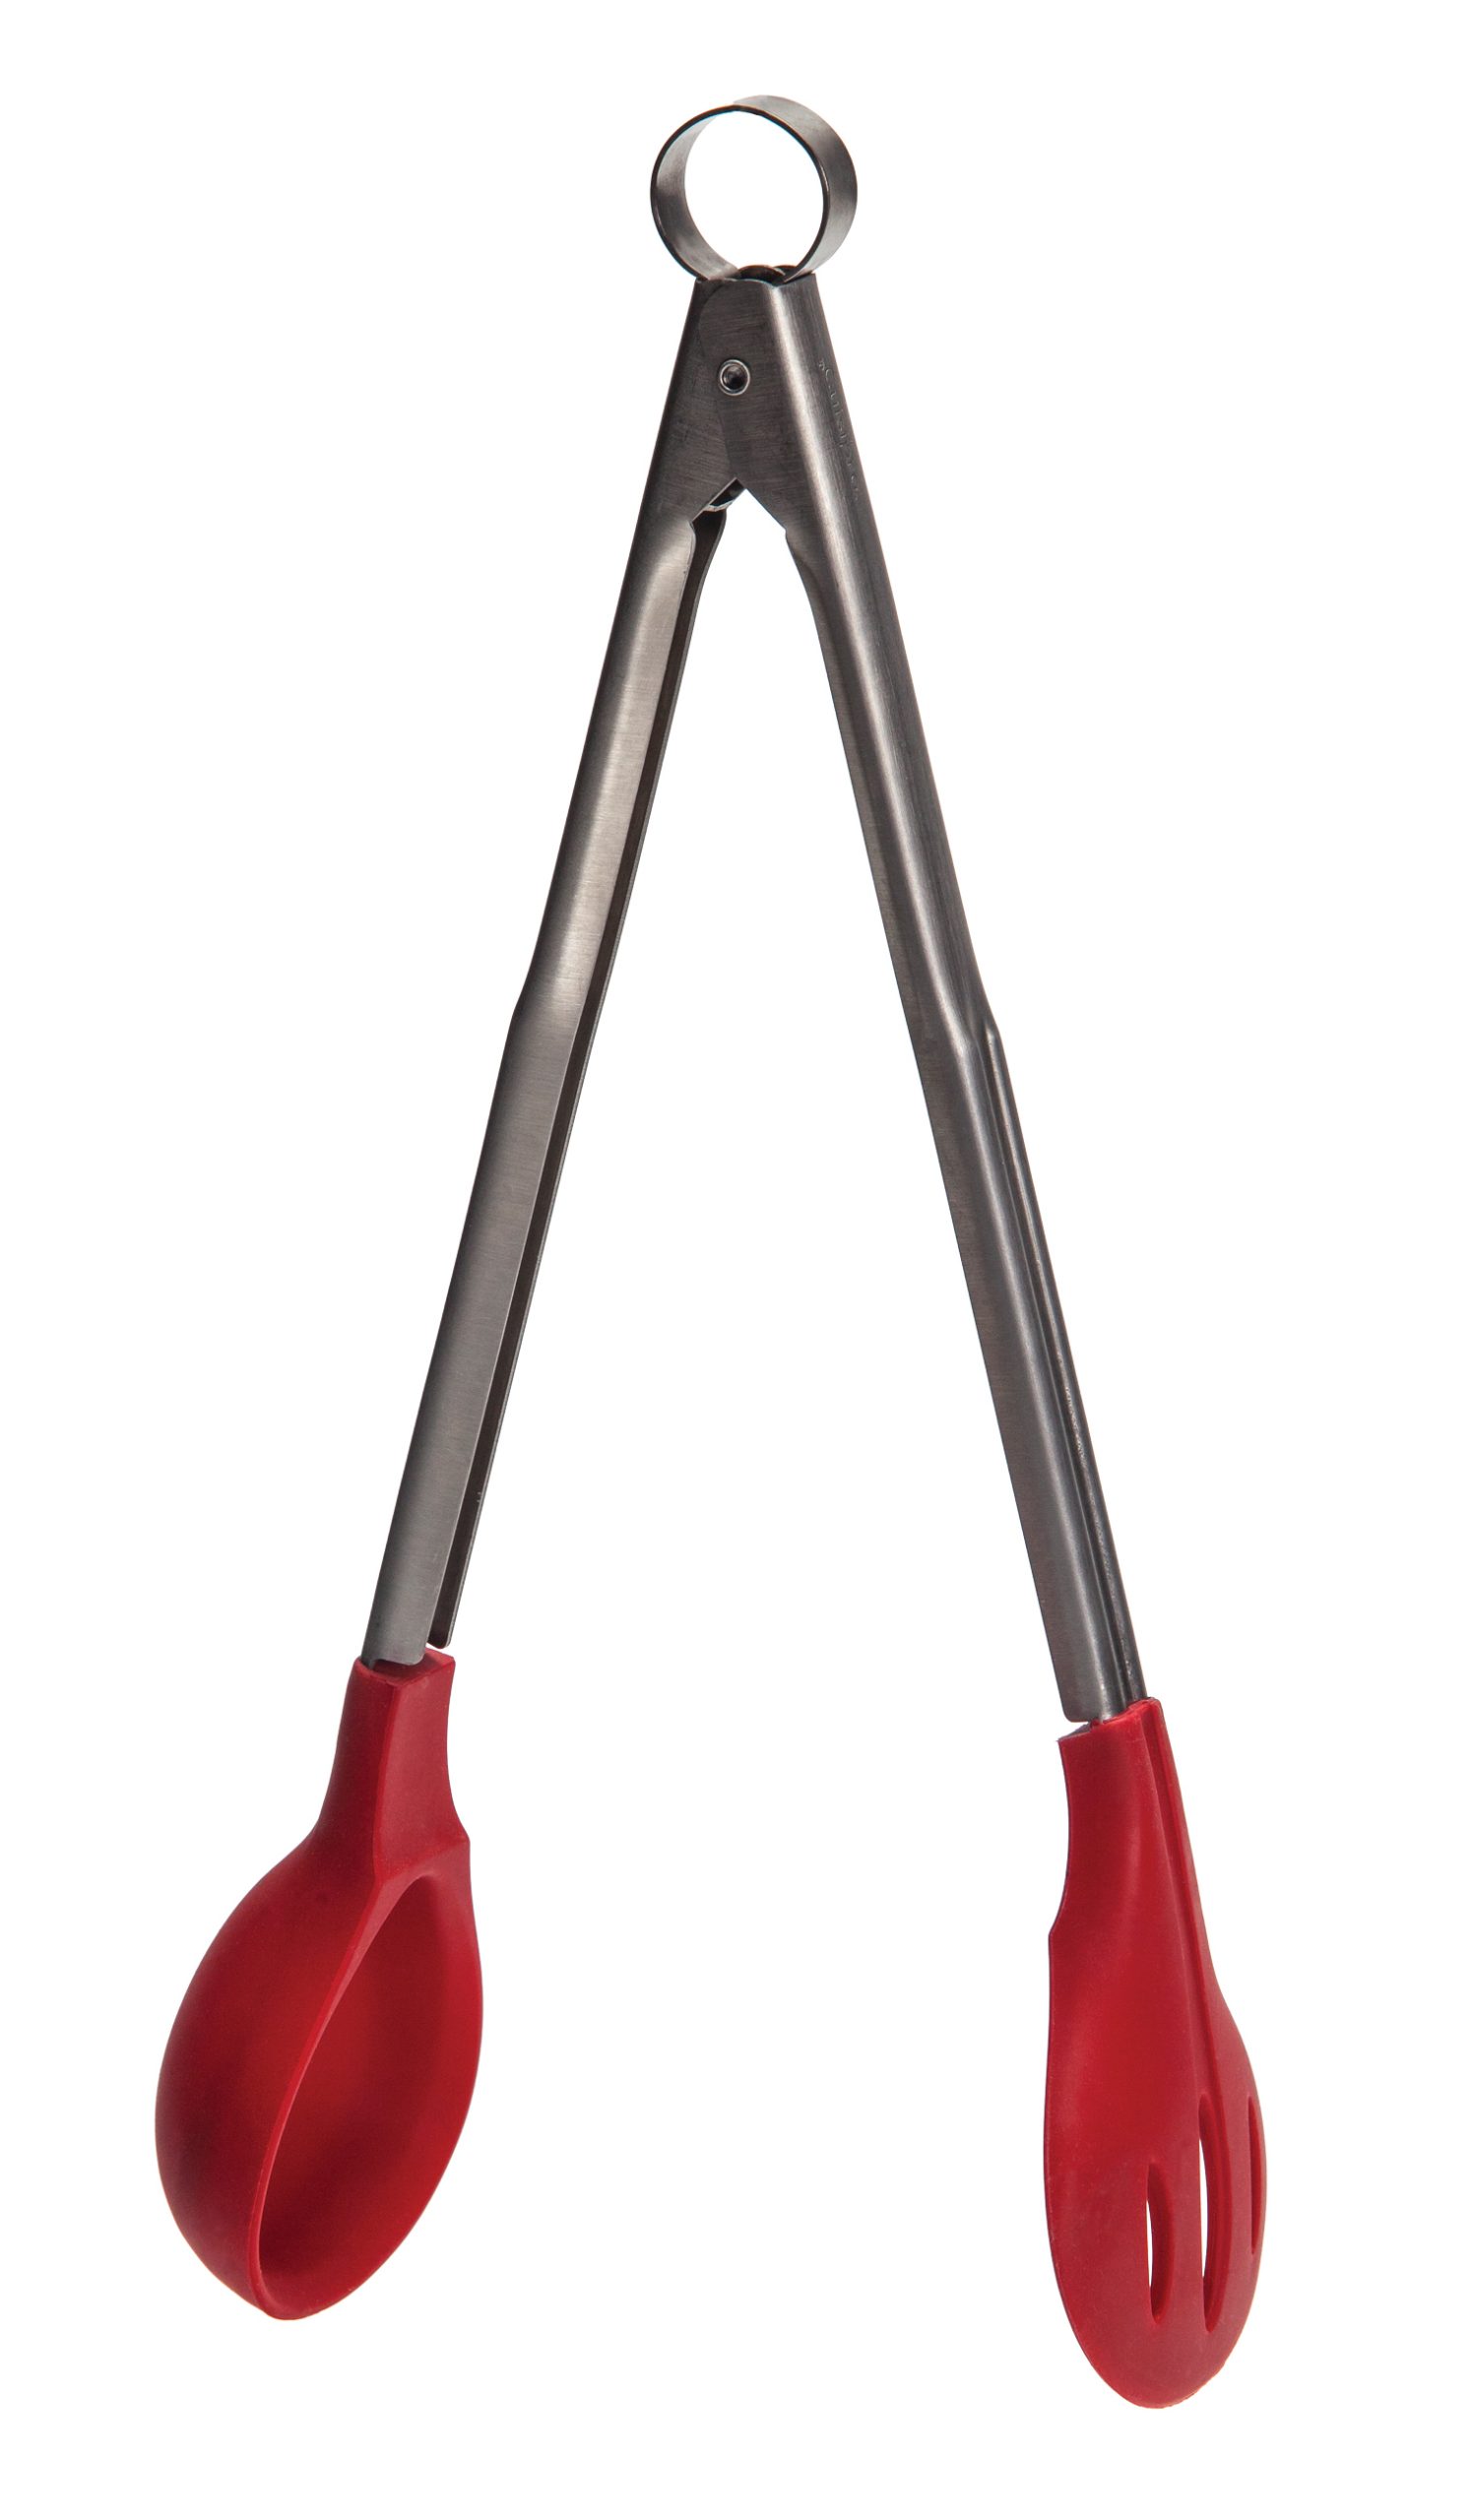 Cuisipro stew tongs, $19.95, from The Pan Tree.